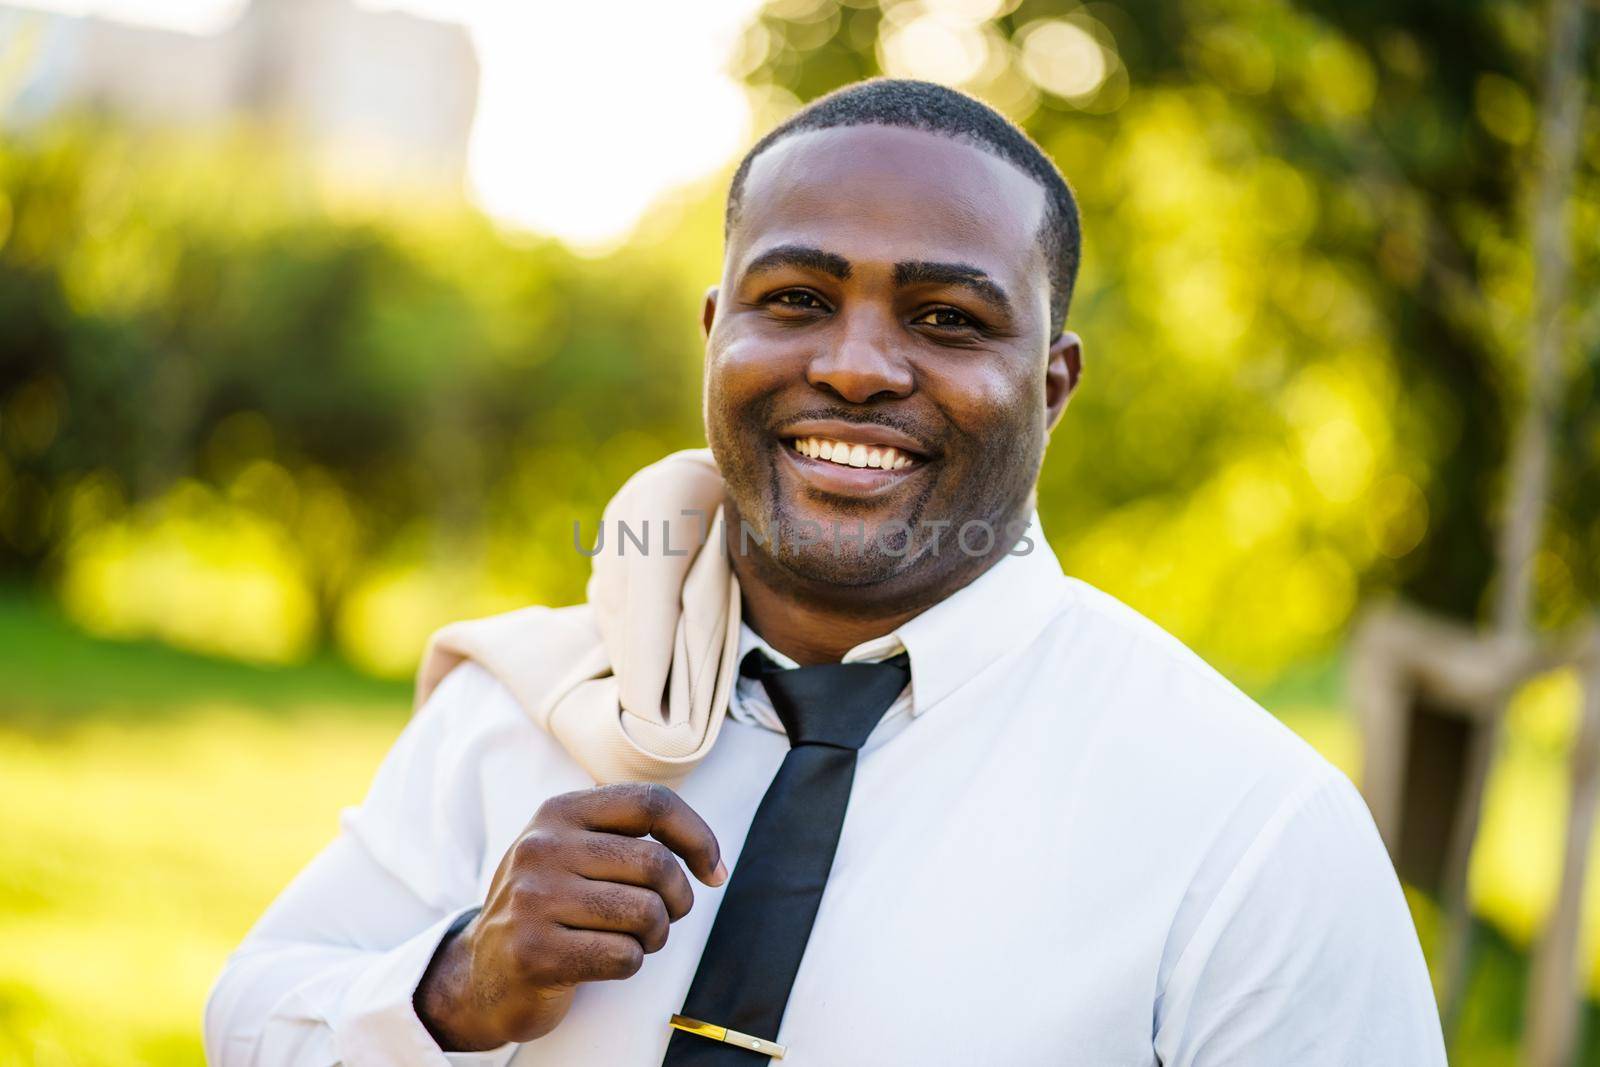 Portrait of happy african-american businessman who is looking at camera and smiling.